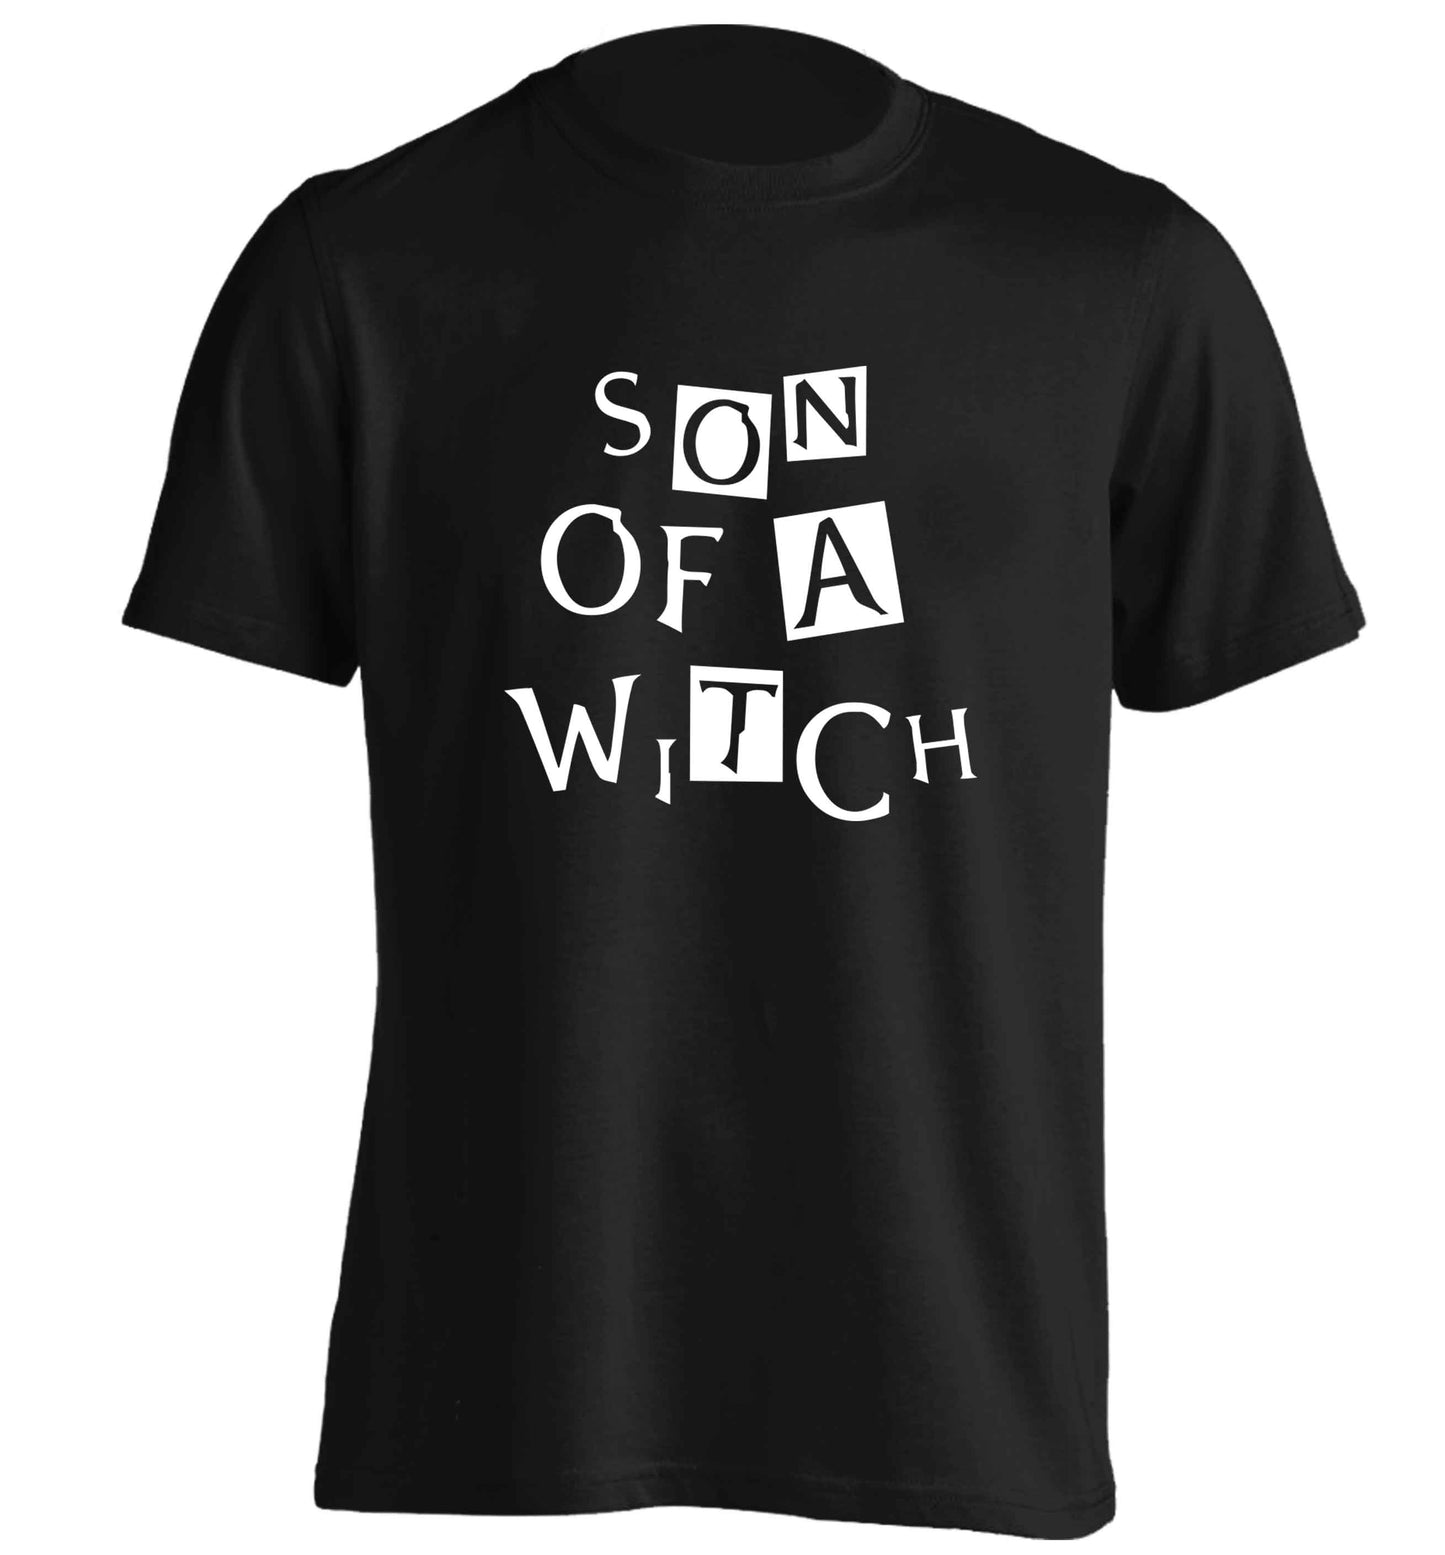 Son of a witch adults unisex black Tshirt 2XL